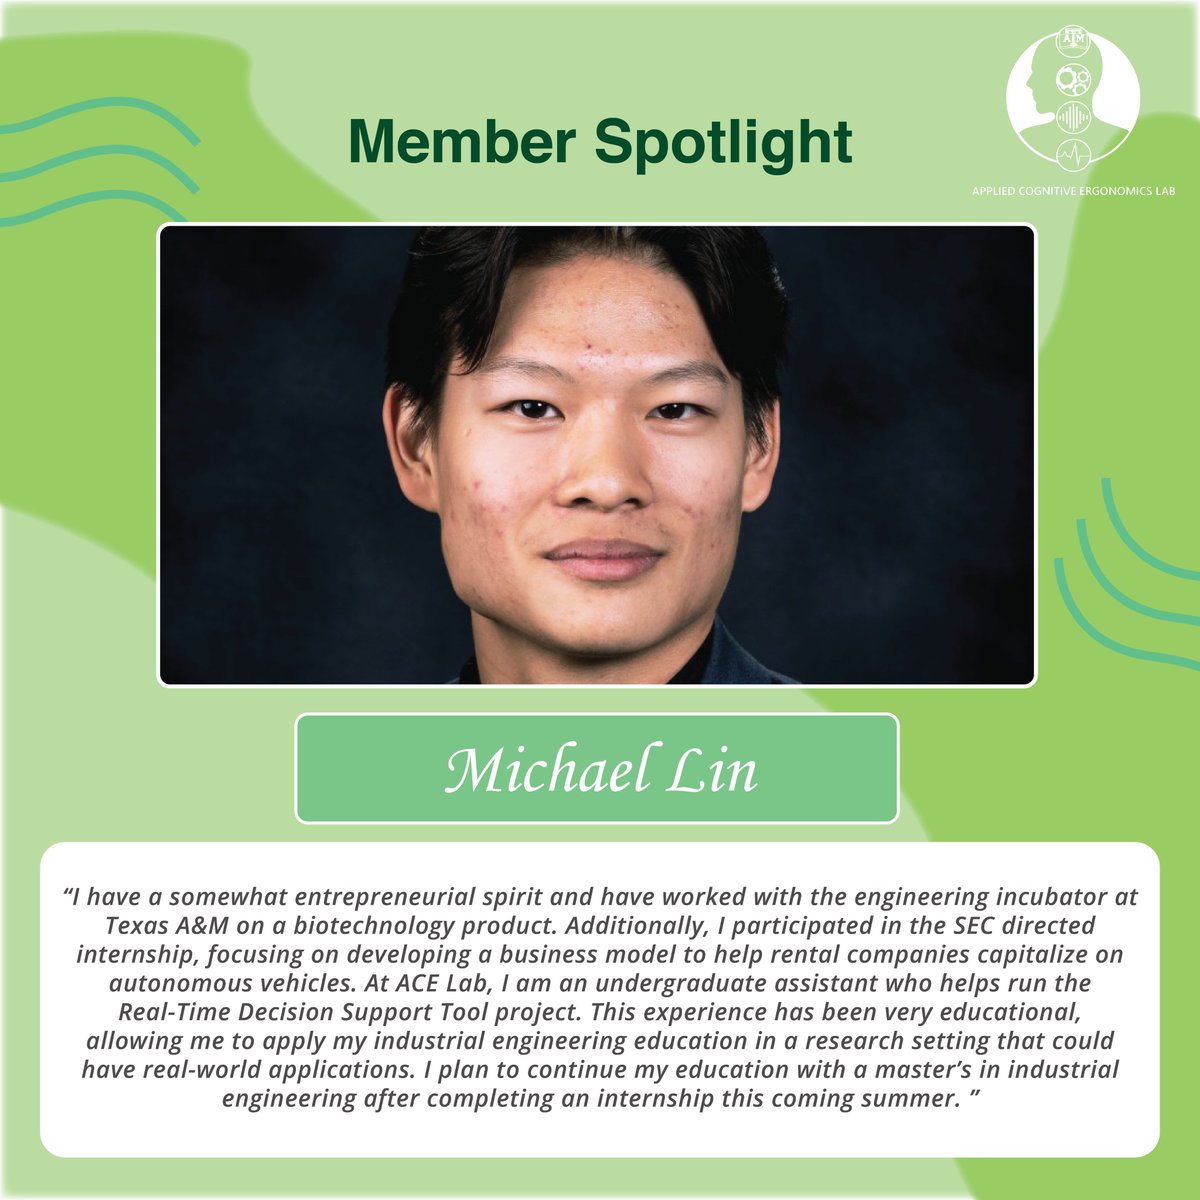 #StudentSpotlight 🌟 Meet Michael Lin, a senior industrial engineering student with a minor in engineering project management. He's an undergraduate researcher at ACE Lab. #industrialengineering #biotechnology #undergraduate #researcher #Entrepreneurship  #projectmanagement